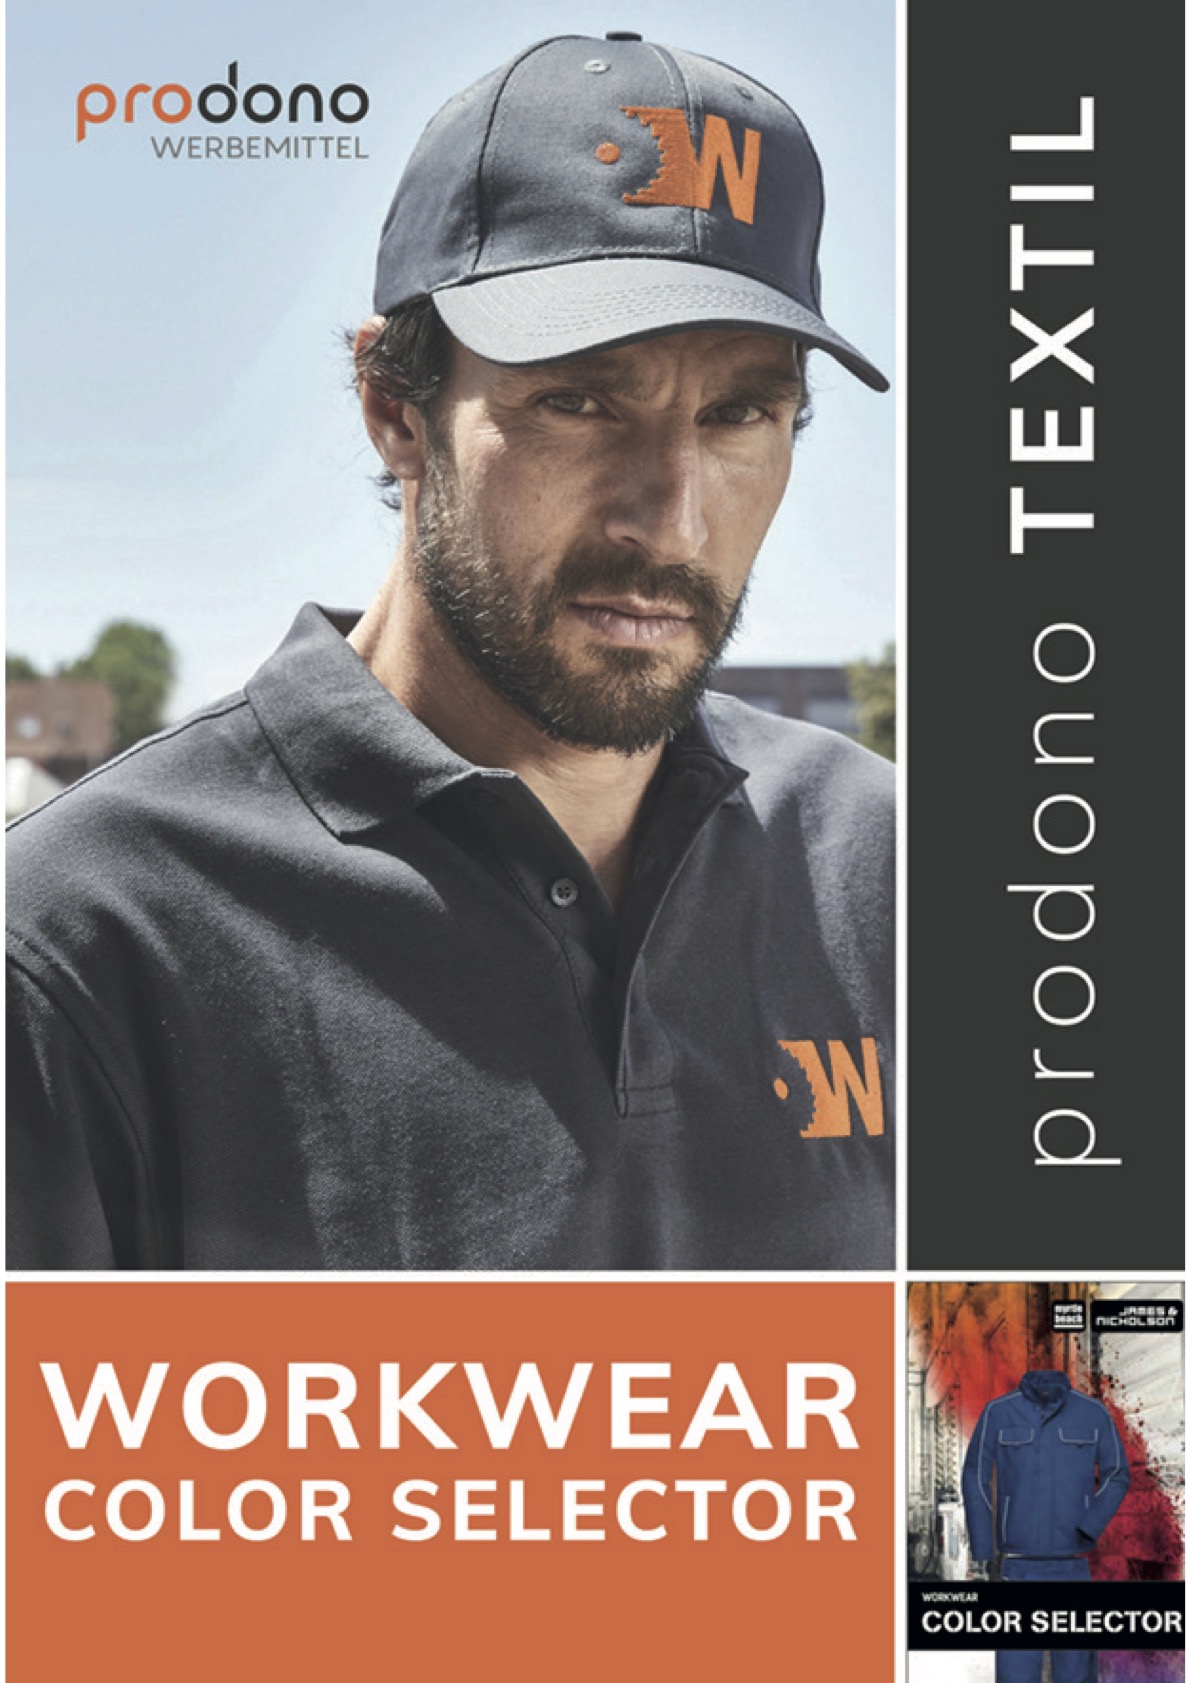 WORKWEAR COLOR SELECTOR